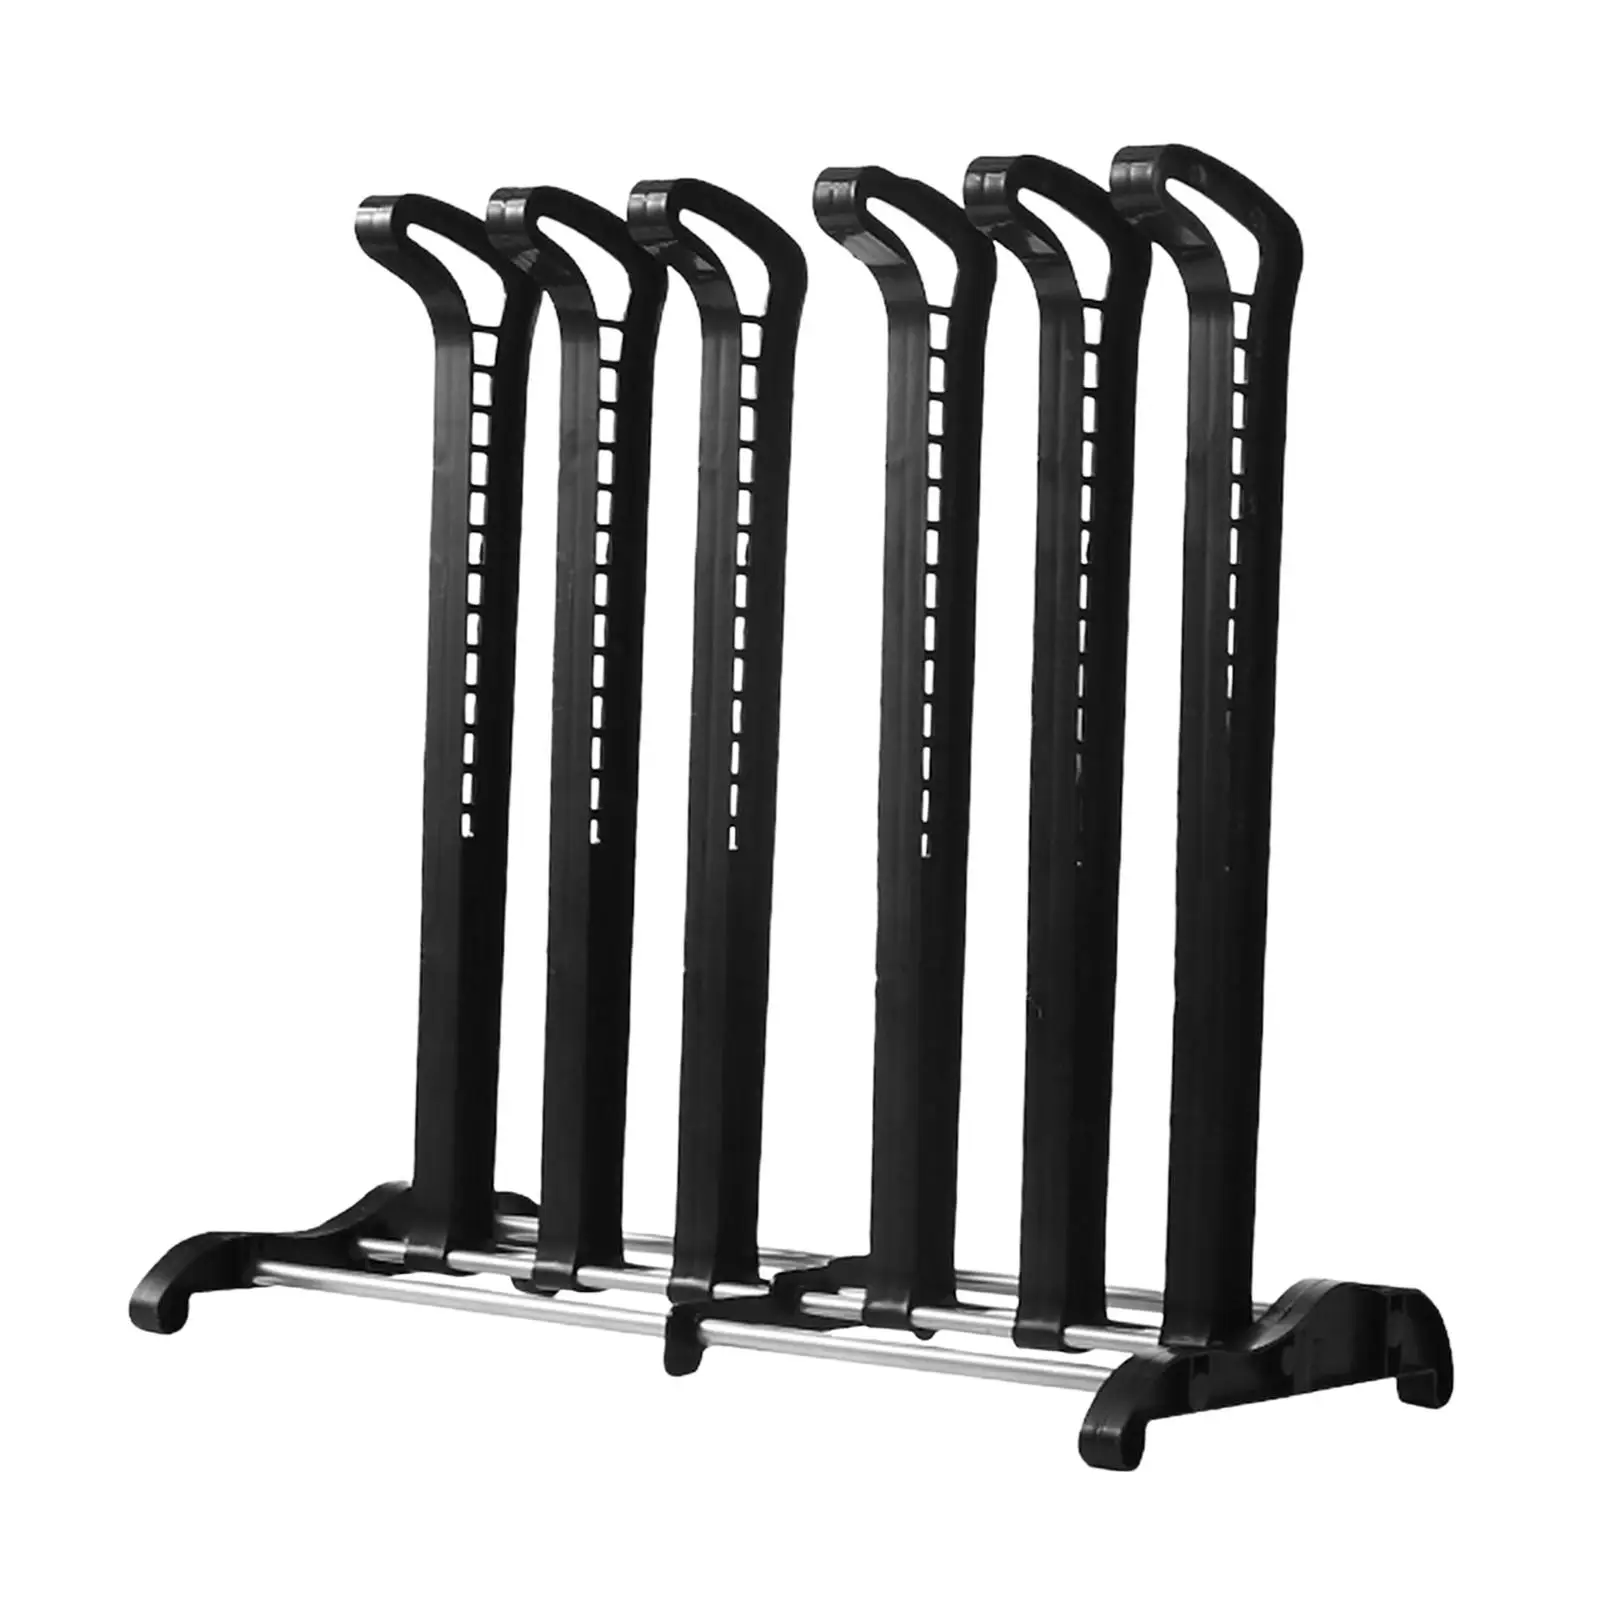 Boots Rack Easy to Install Shoe Stand Tools Boot Organizer for Dorm Room Bedroom Patio Outdoor Closet Tall Boots Storage